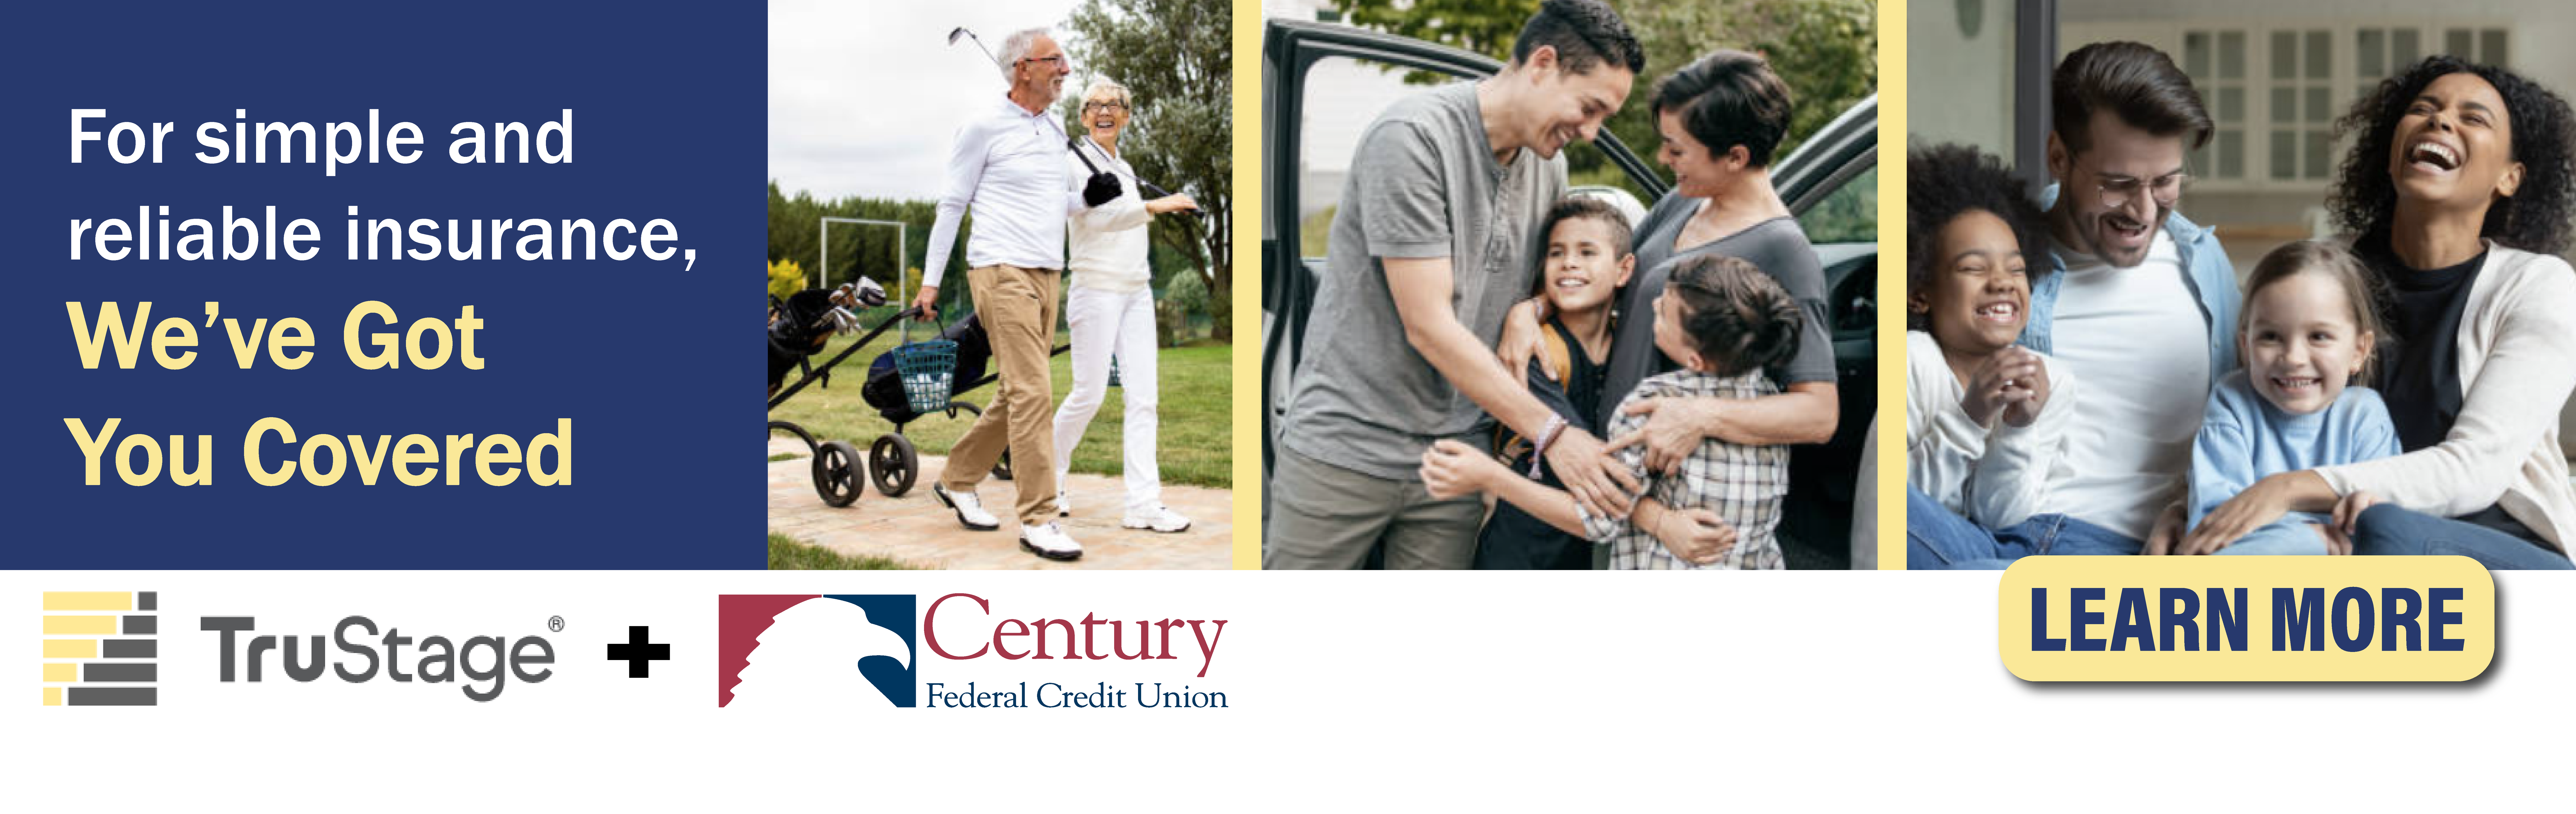 For simple and reliable insurance, We've got you covered. TruStage Insurance from Century Federal Learn More